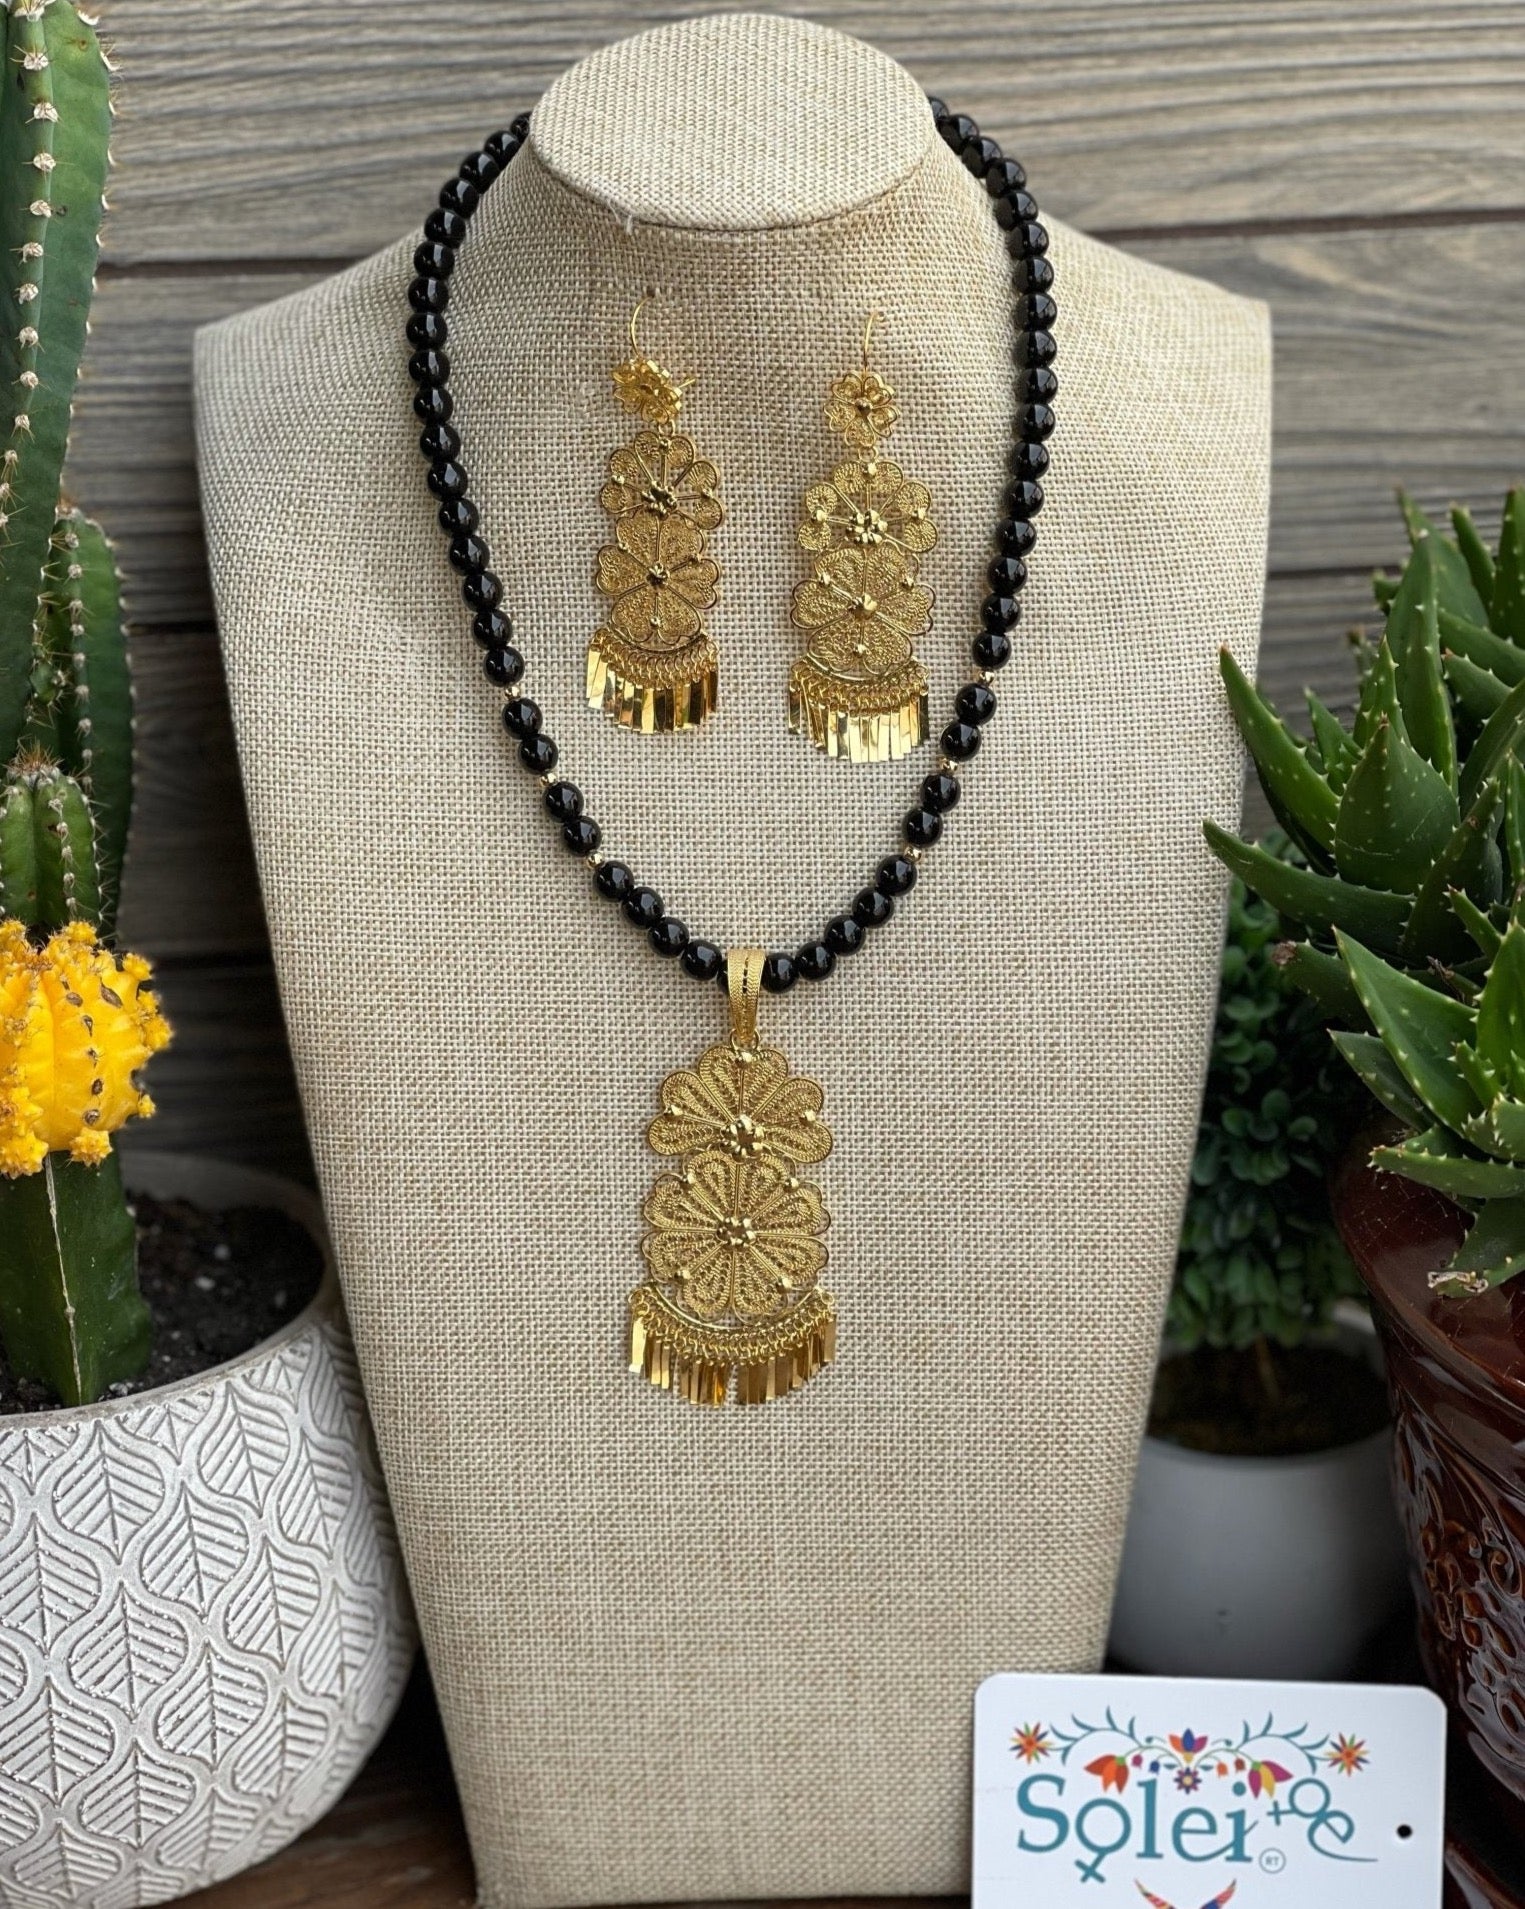 Mexican Filigree Earrings and Necklace. Stone Bead Necklace. Elegant Choker Necklace. Margarita Abanico - Solei Store